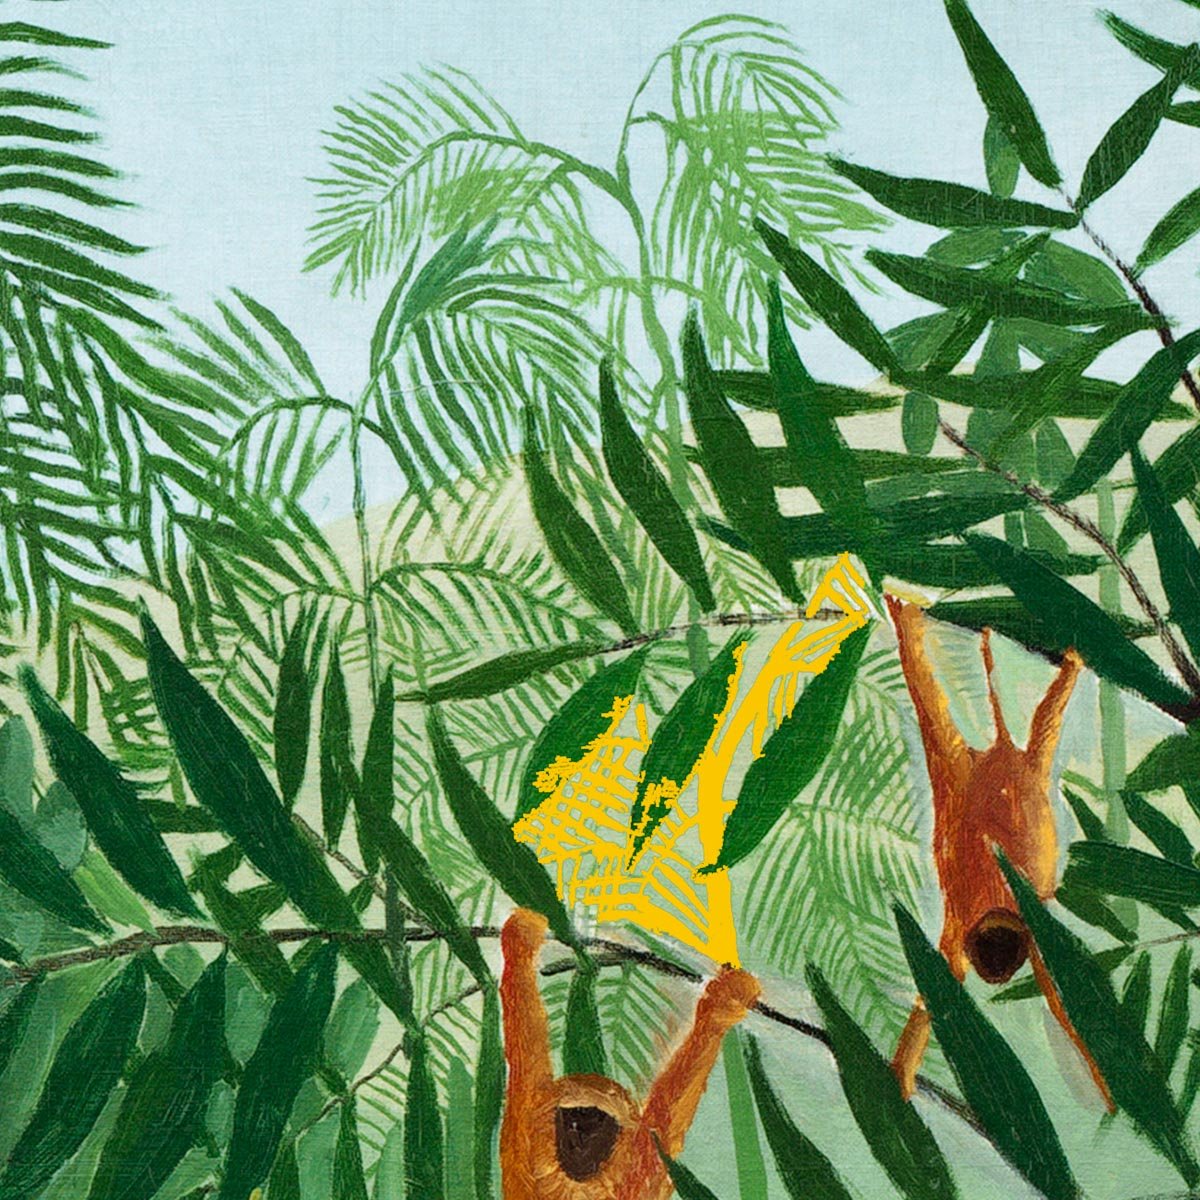 Tropical Forest Rousseau Exhibition Poster